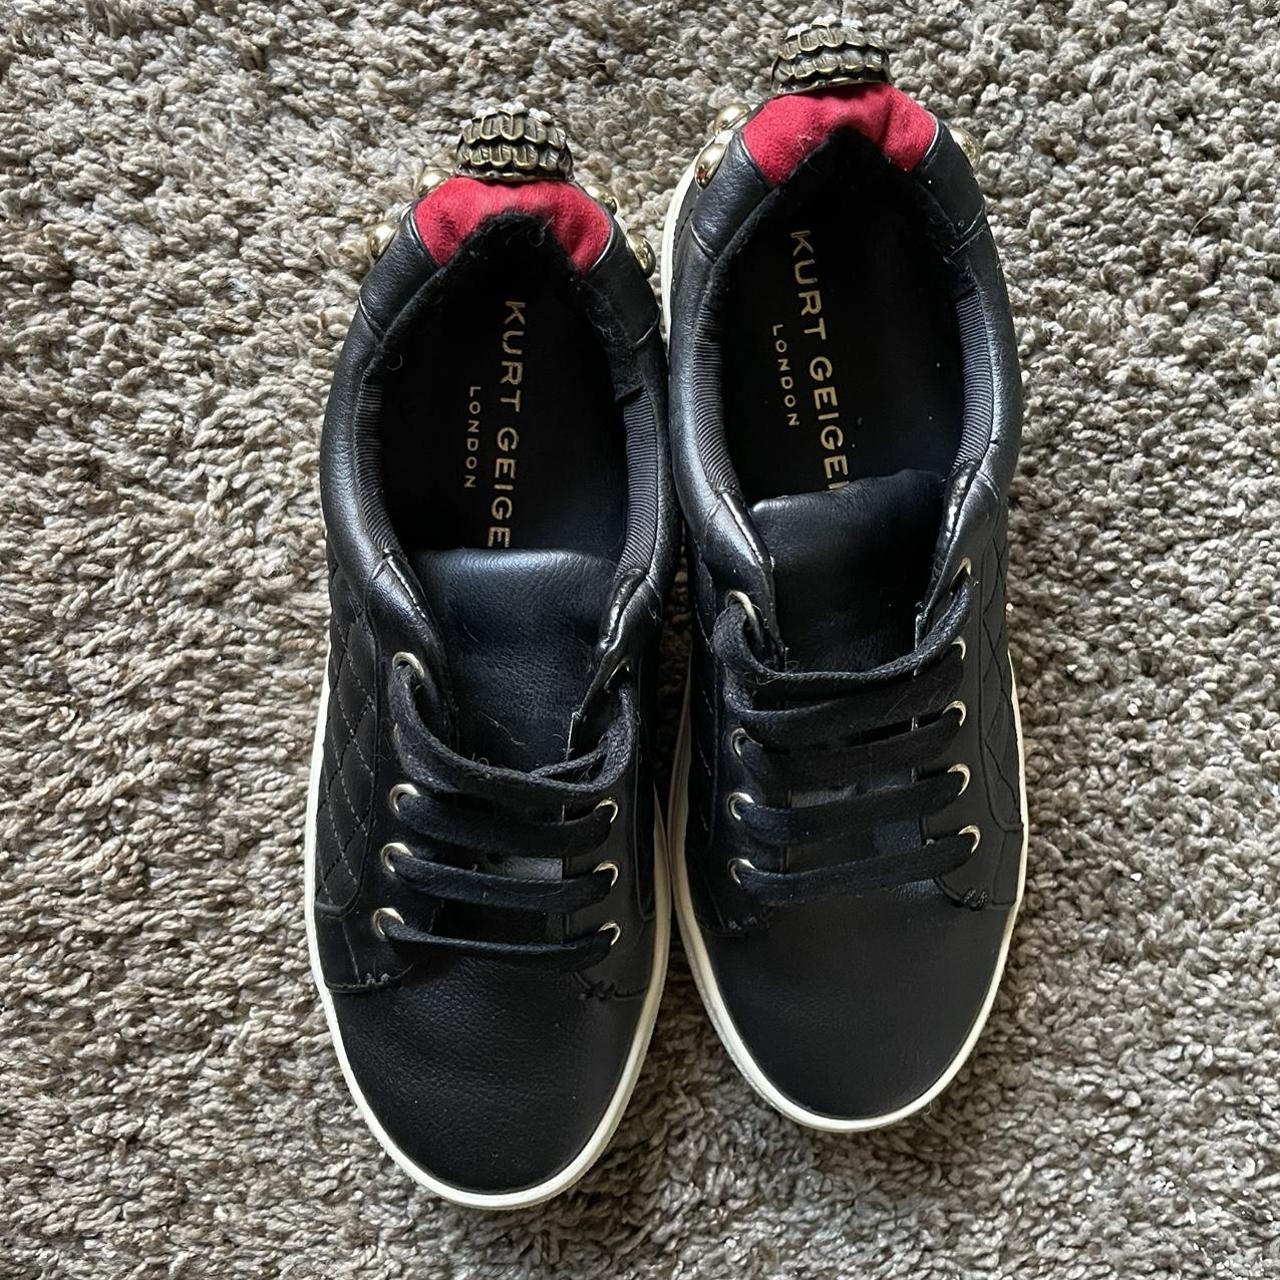 Kurt Geiger Women's Black and Red Trainers (4)